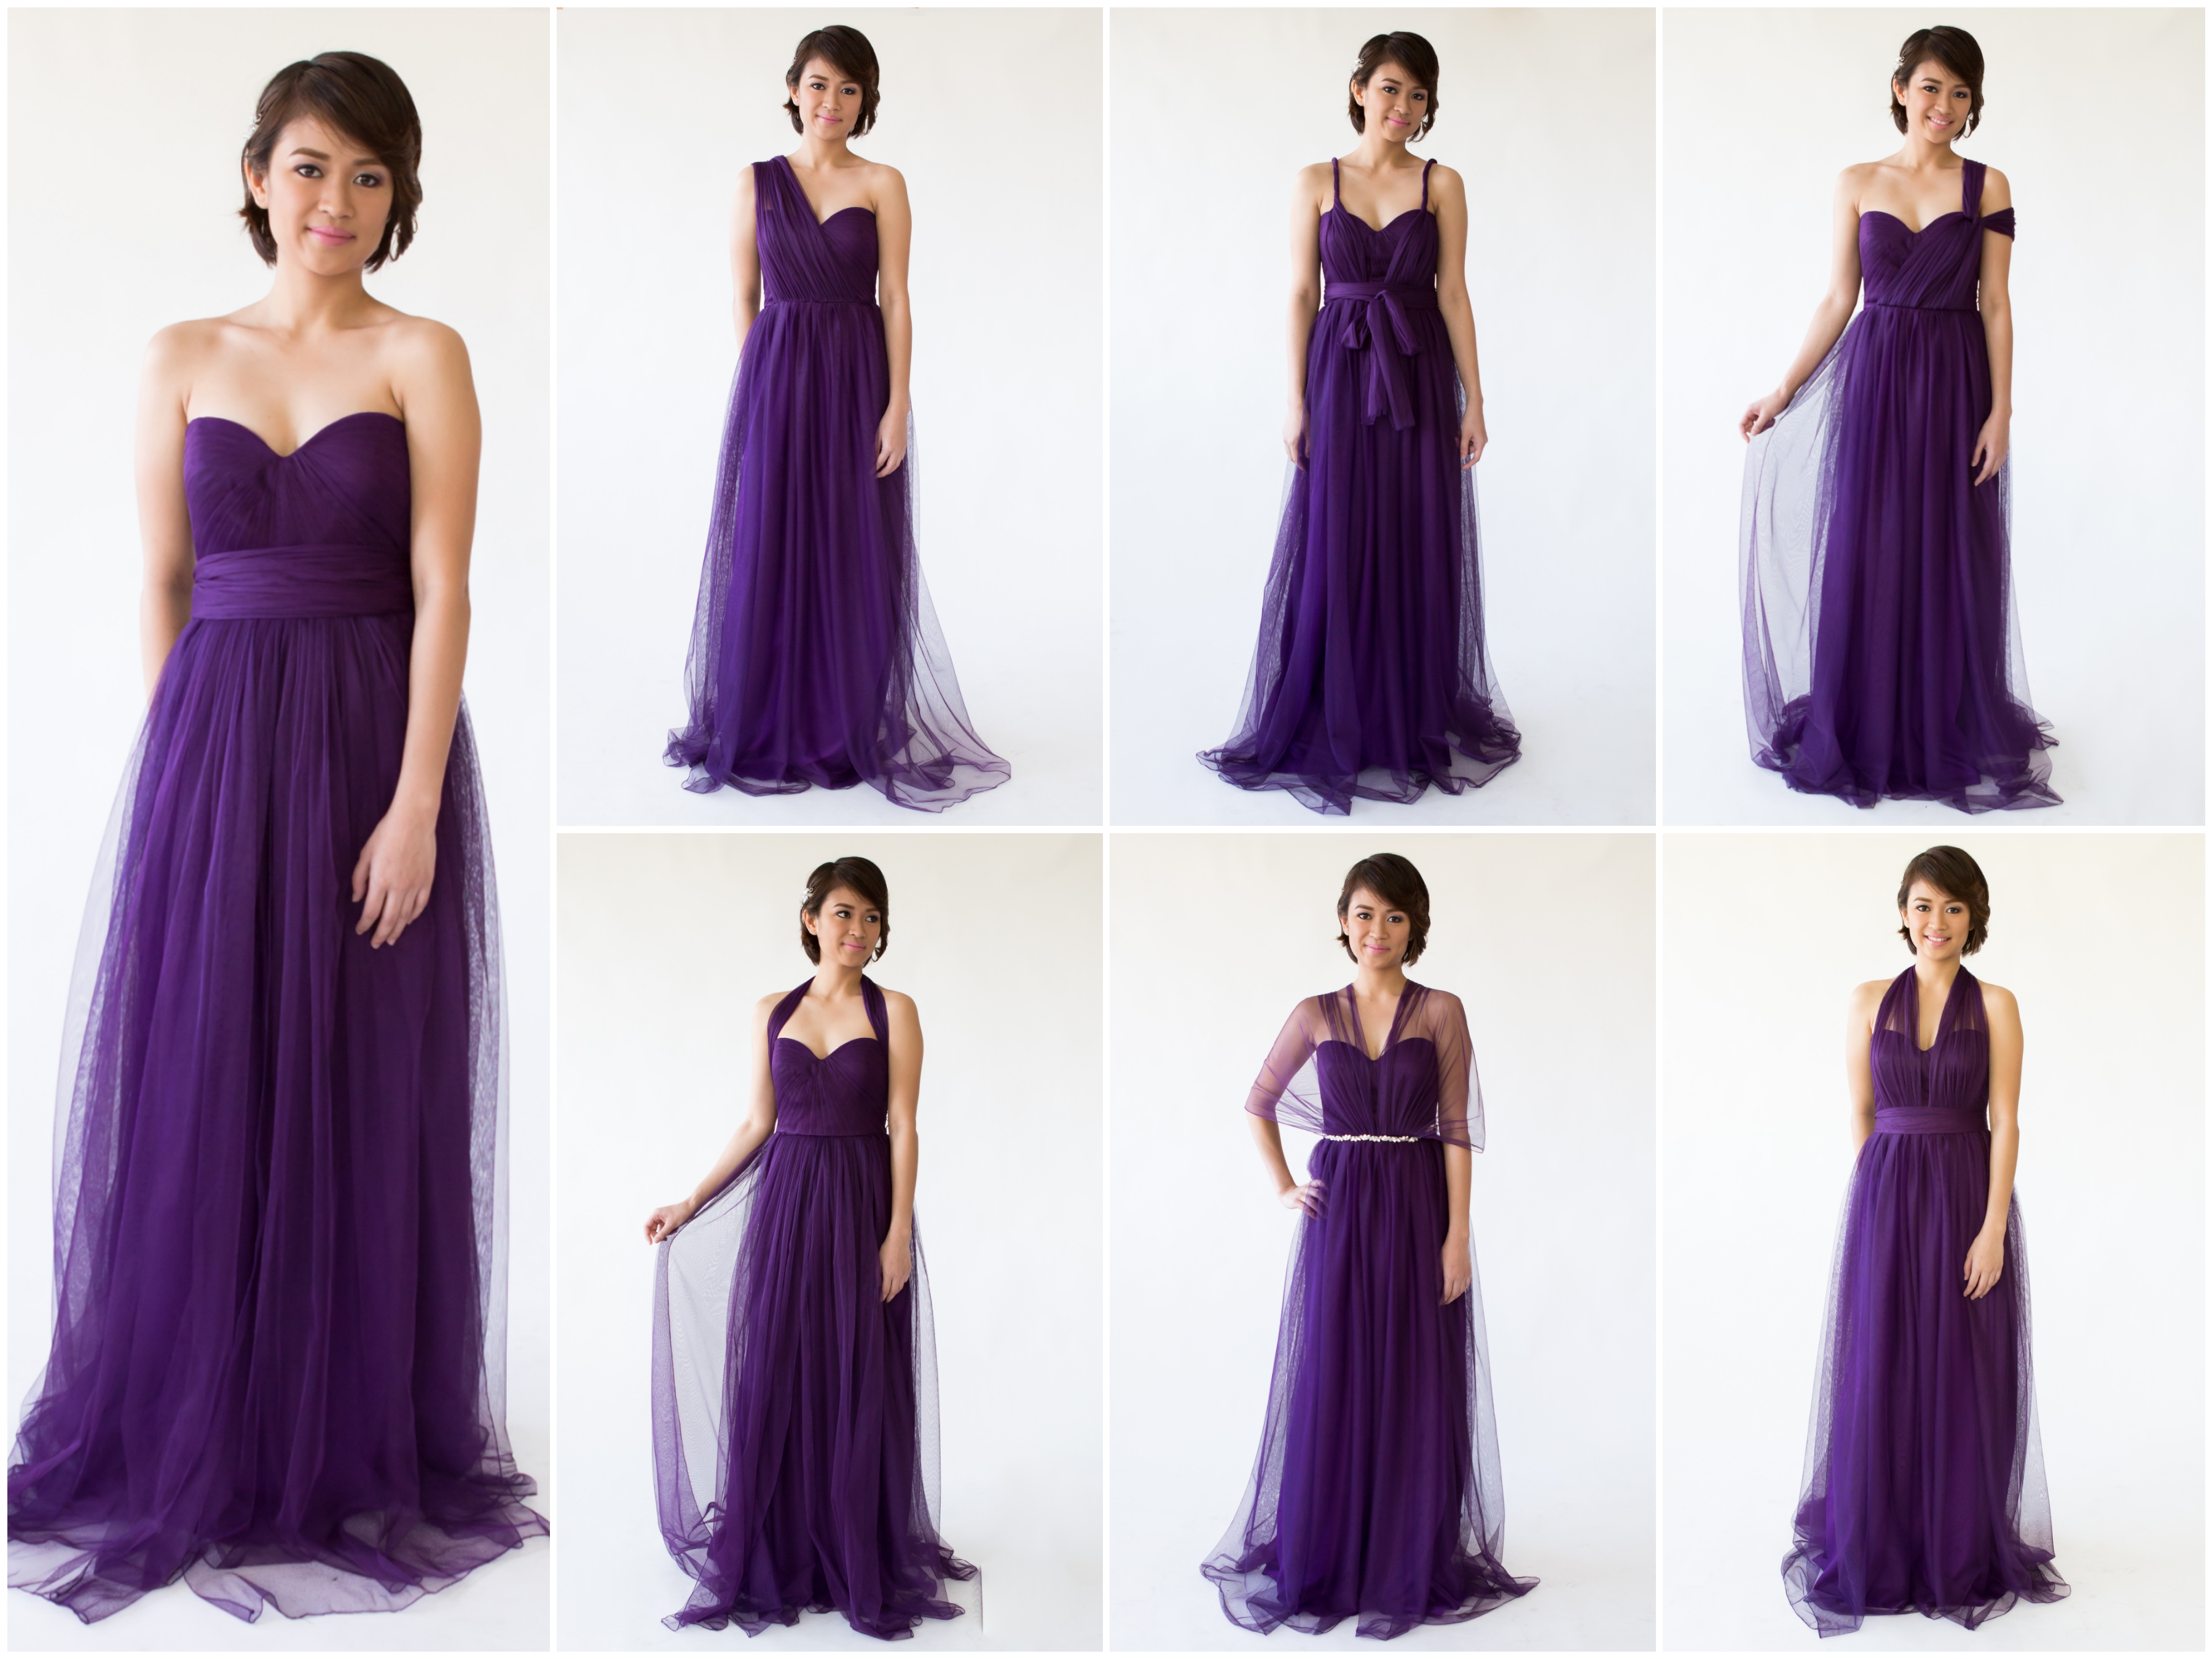 12 Bridesmaid Dresses Styles To Match Your Wedding Theme | WedBoard